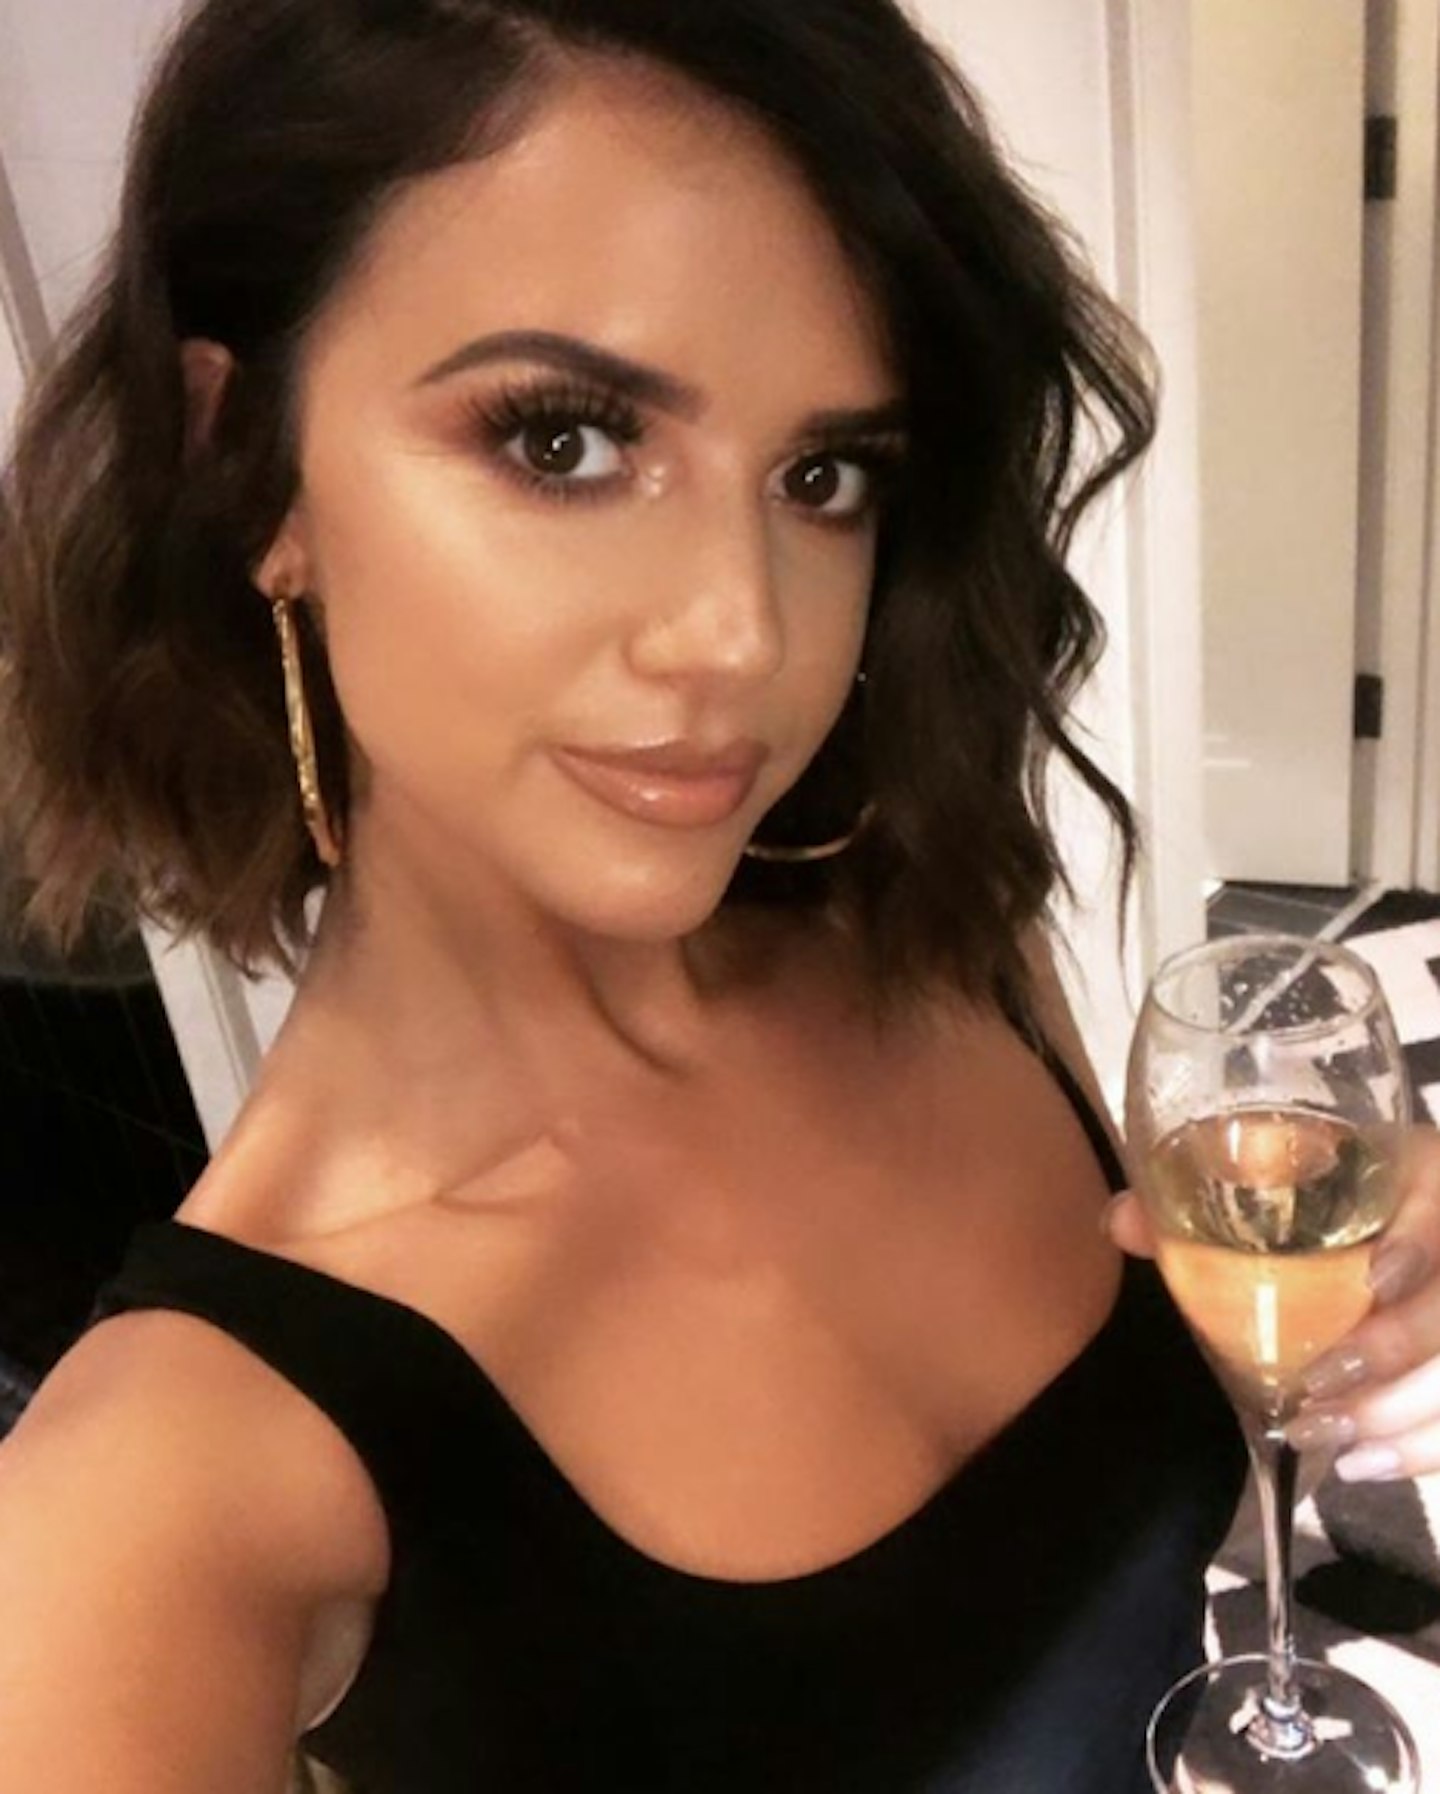 Lucy Mecklenburgh